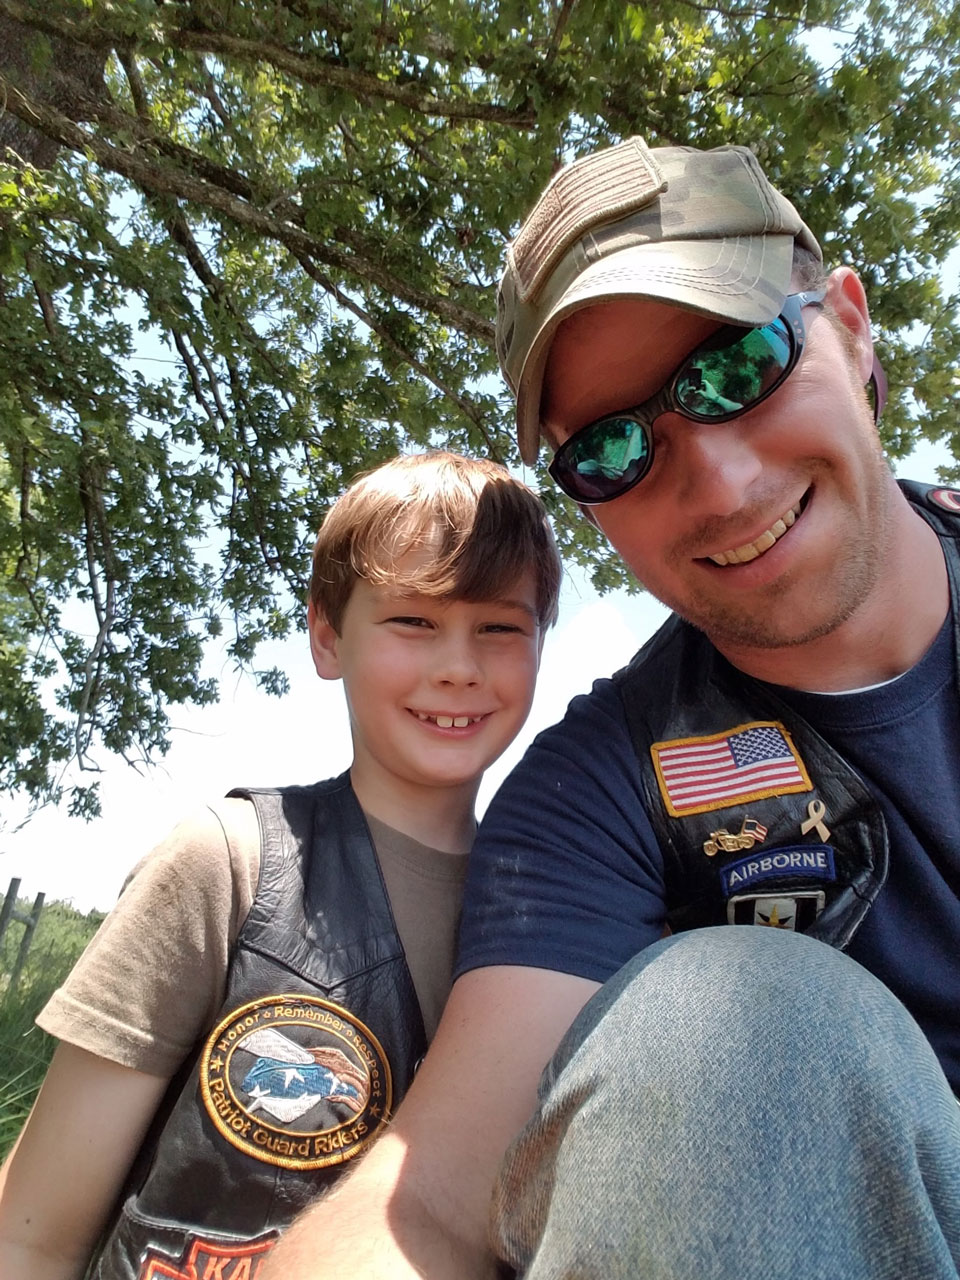 David and his son on the Patriot Guard Riders mission to support the Run For The Wall.